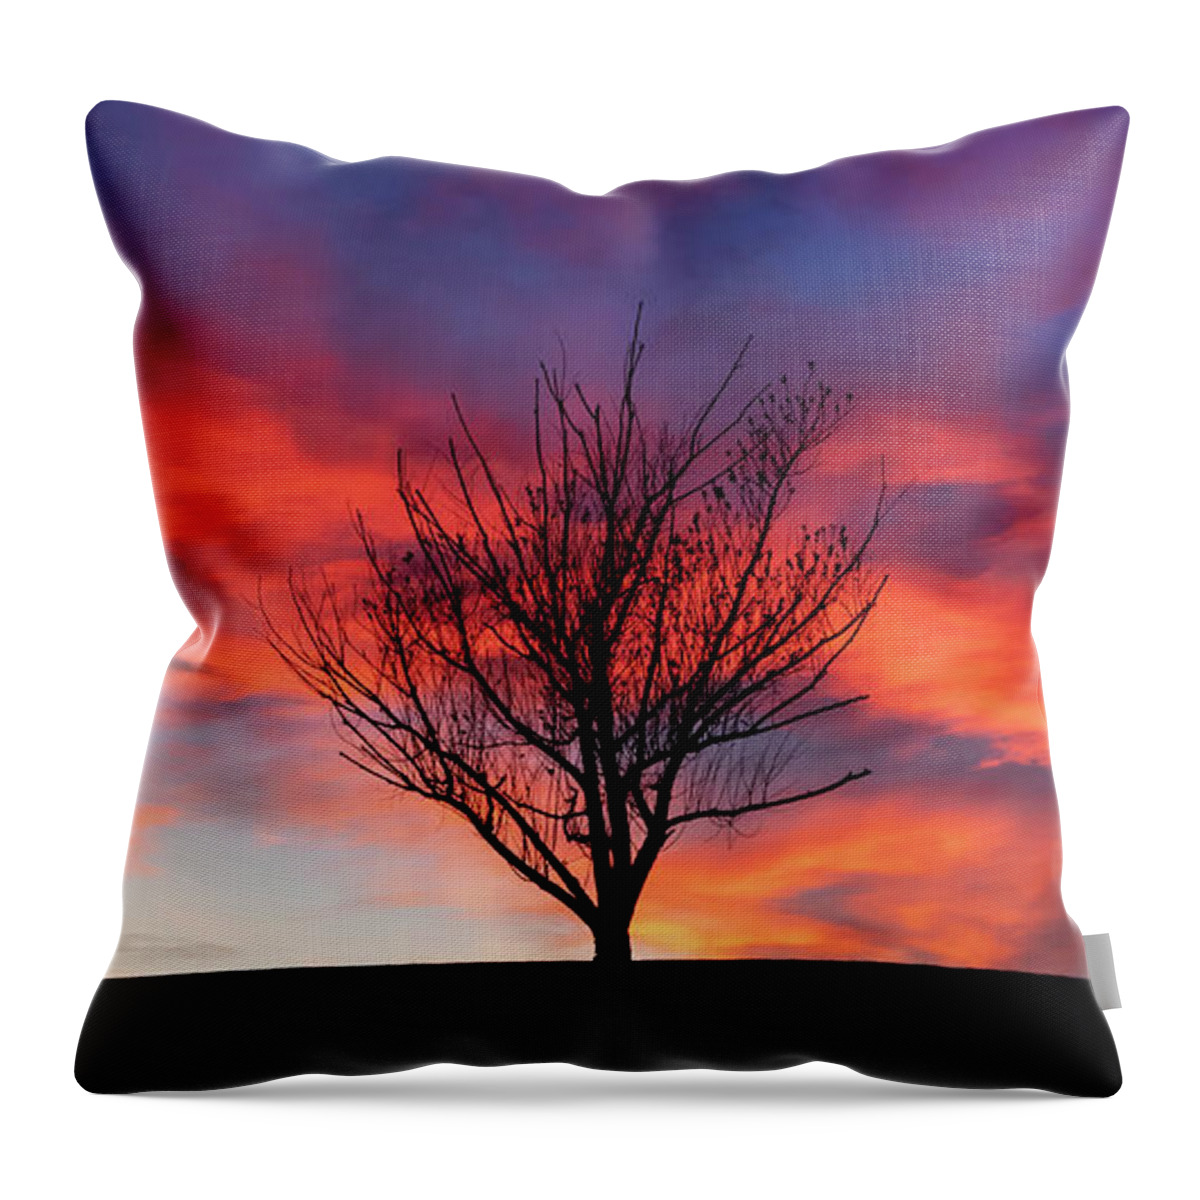 Bare Throw Pillow featuring the photograph The Lone Tree by Manpreet Sokhi